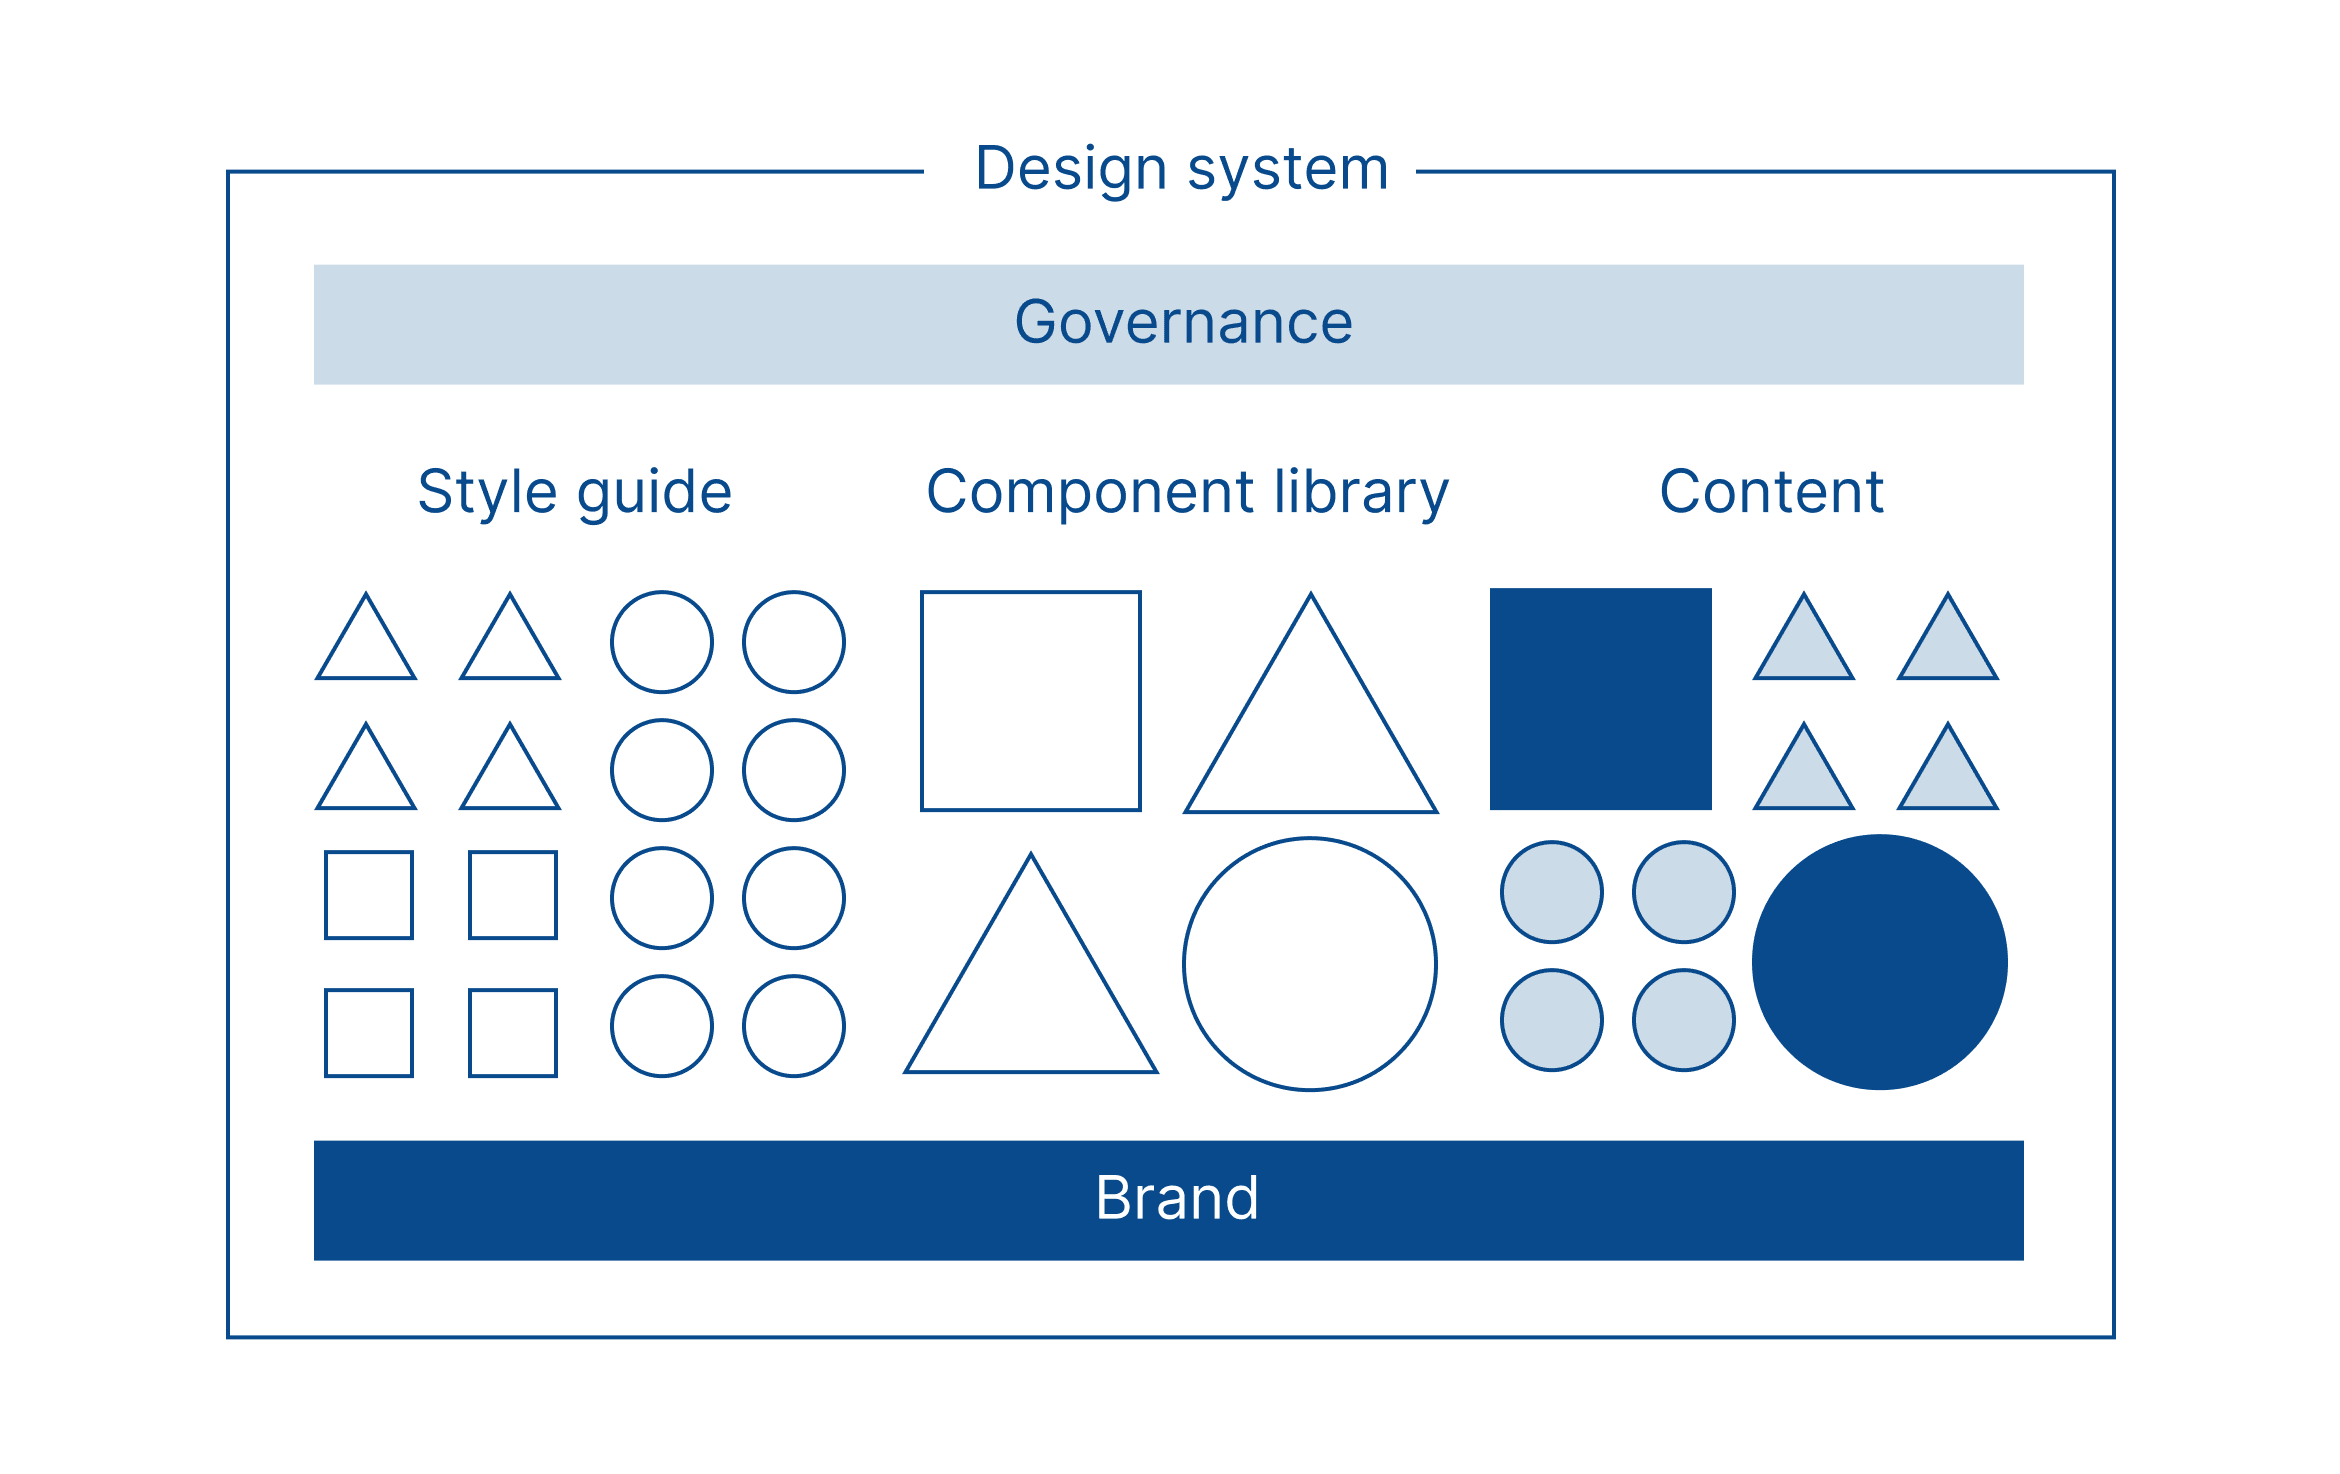 The diagram has three layers outlined by a rectangle labelled "Design System". 
The bottom layer of the diagram is a long rectangle labelled "Brand". It underpins the three sections that make up the second layer. 
Section one is titled "Style guide" and is illustrated by small triangles, squares and circles stacked neatly in a 4 x 4 square.
Section two is titled "Component library" and is illustrated by a large square and a large triangle stacked on top of a large circle and a second large triangle. 
Section three is titled "Content" and is illustrated by a combination of large shapes and small shapes harmoniously arranged into a square.
The third, and top, layer of the diagram is a rectangle labelled "Governance".